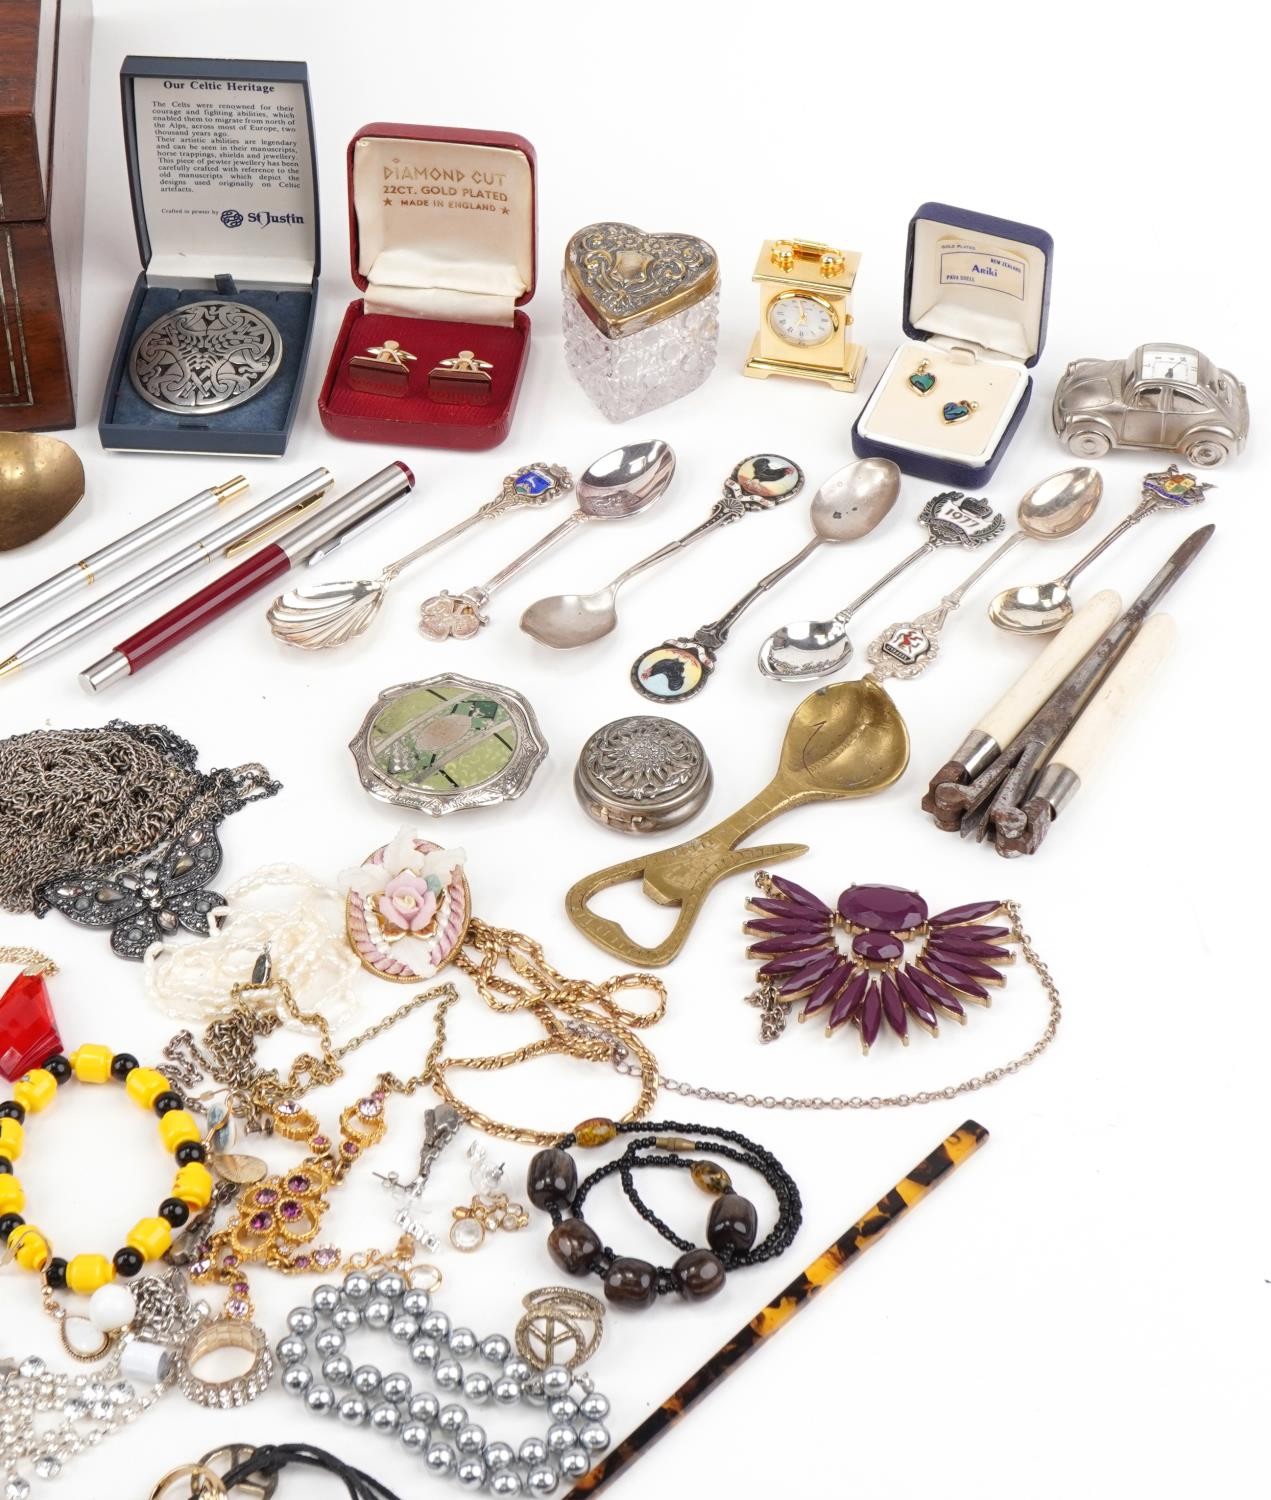 Large collection of vintage and later jewellery, wristwatches and objects including semi precious - Image 3 of 5